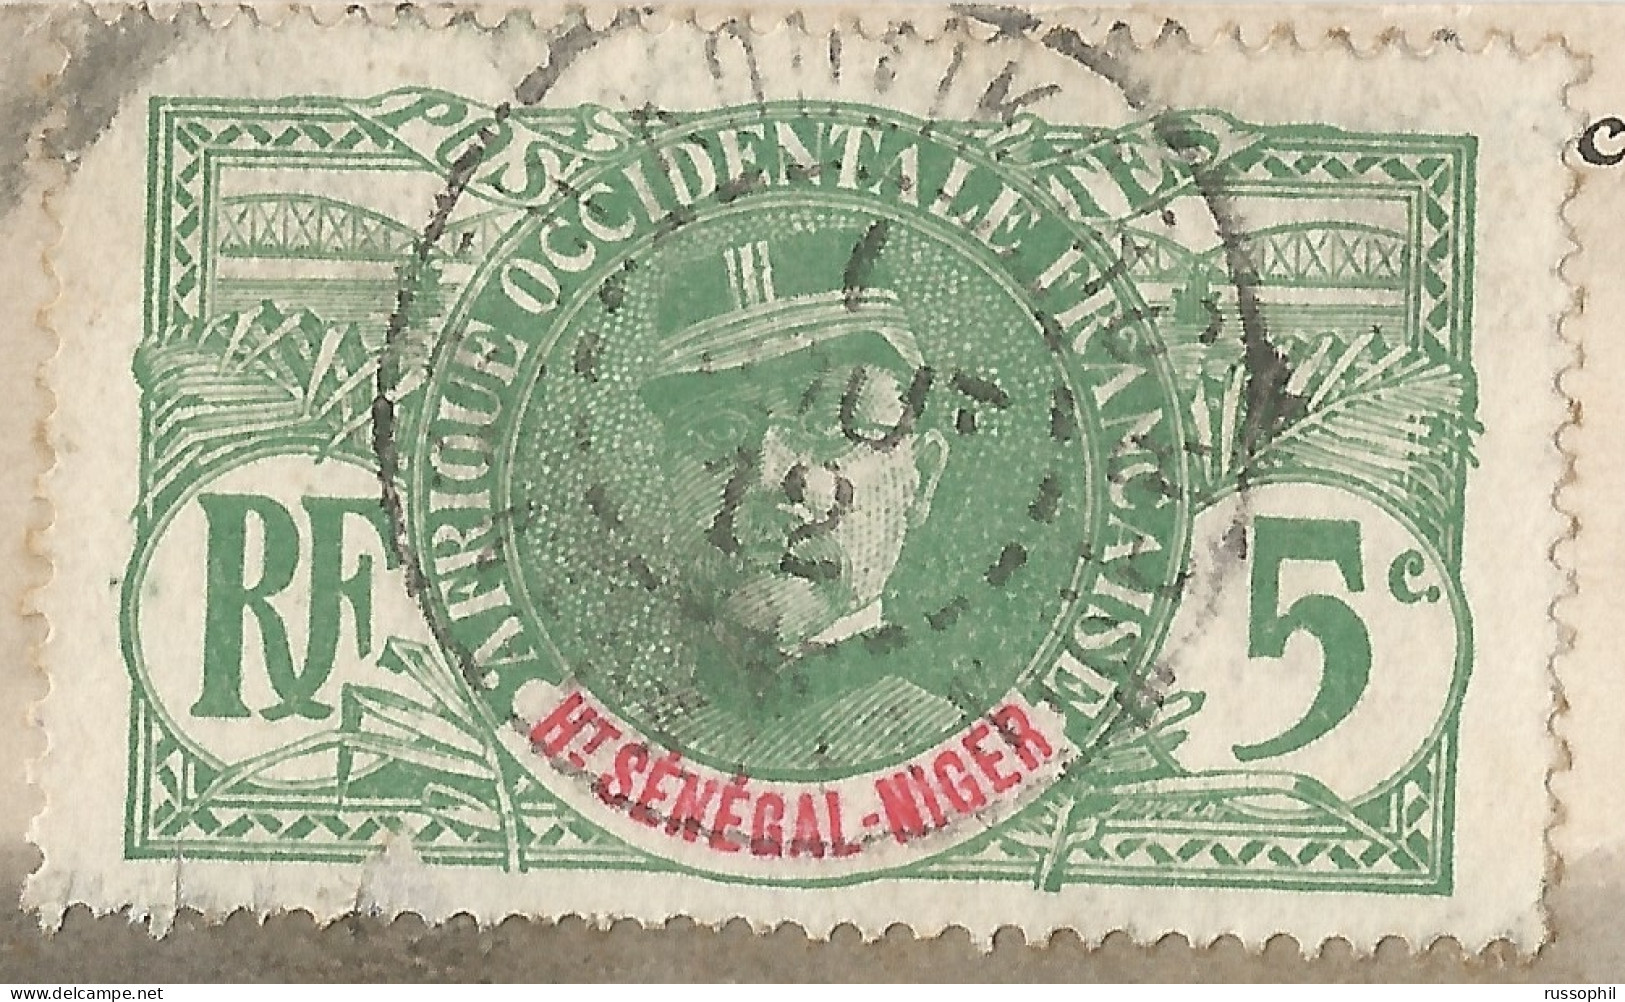 HAUT SENEGAL NIGER - 5 CENT. FAIDHERBE FRANKING PC FROM KOULIKORO TO FRANCE - 1912 - Lettres & Documents